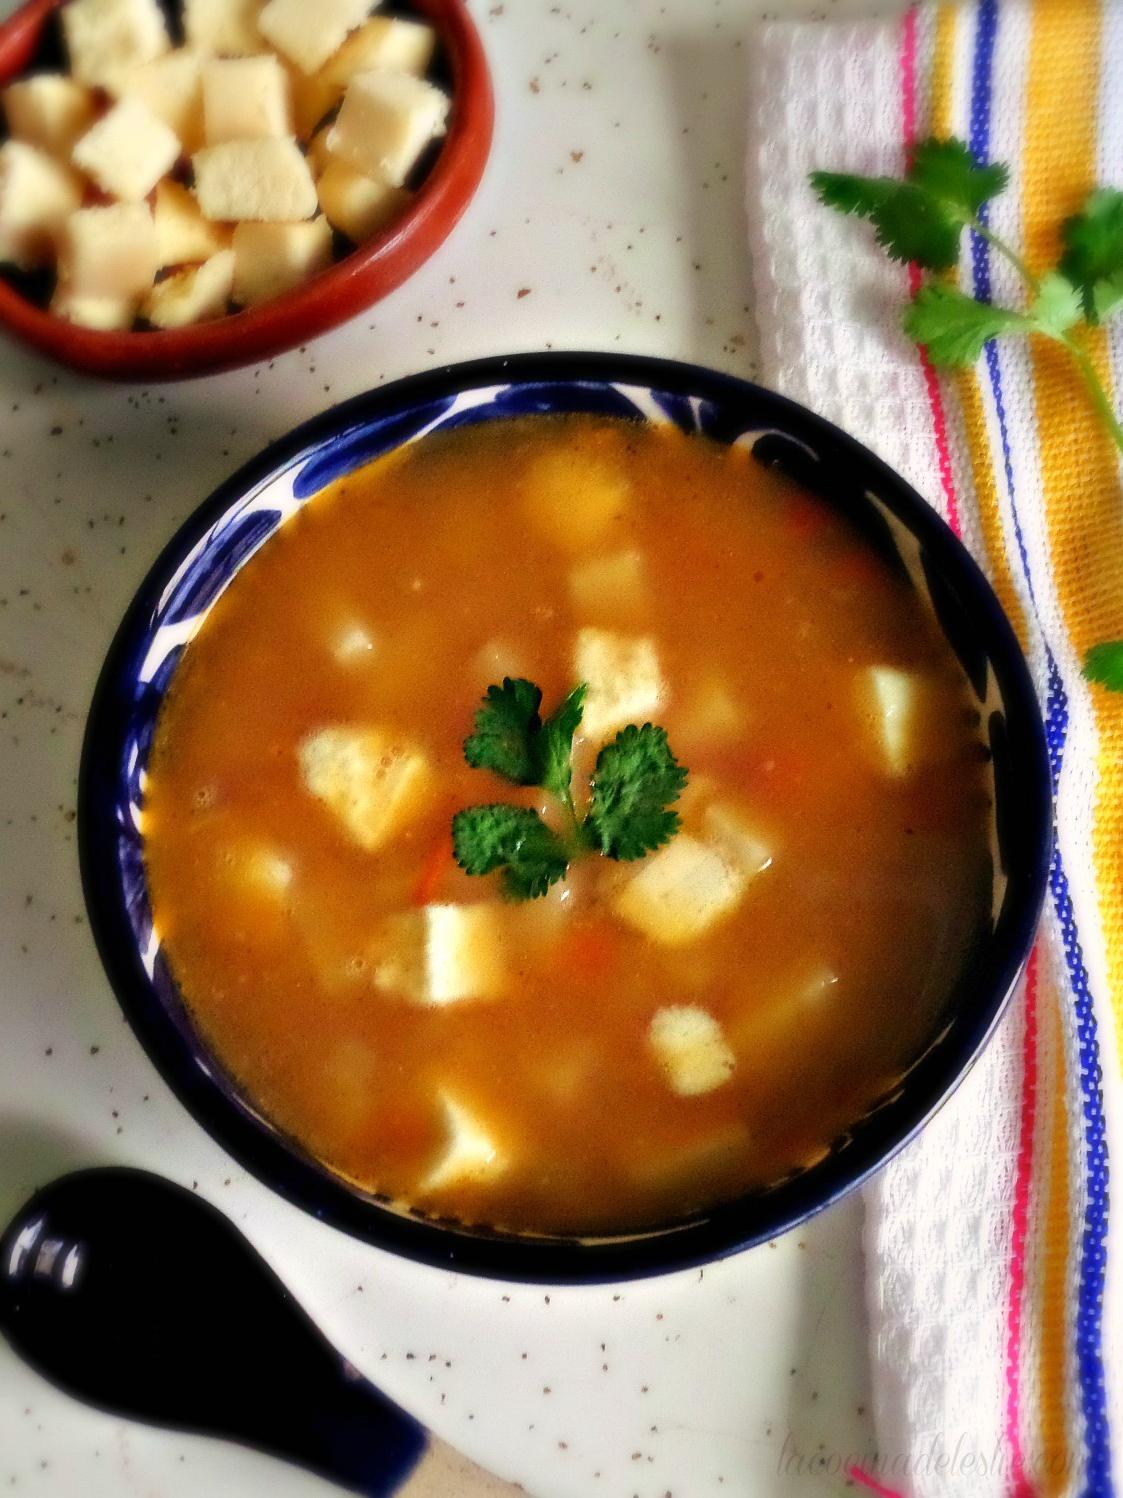  Warm up with a bowl of Sopa de Papa – it's pure comfort in a bowl.